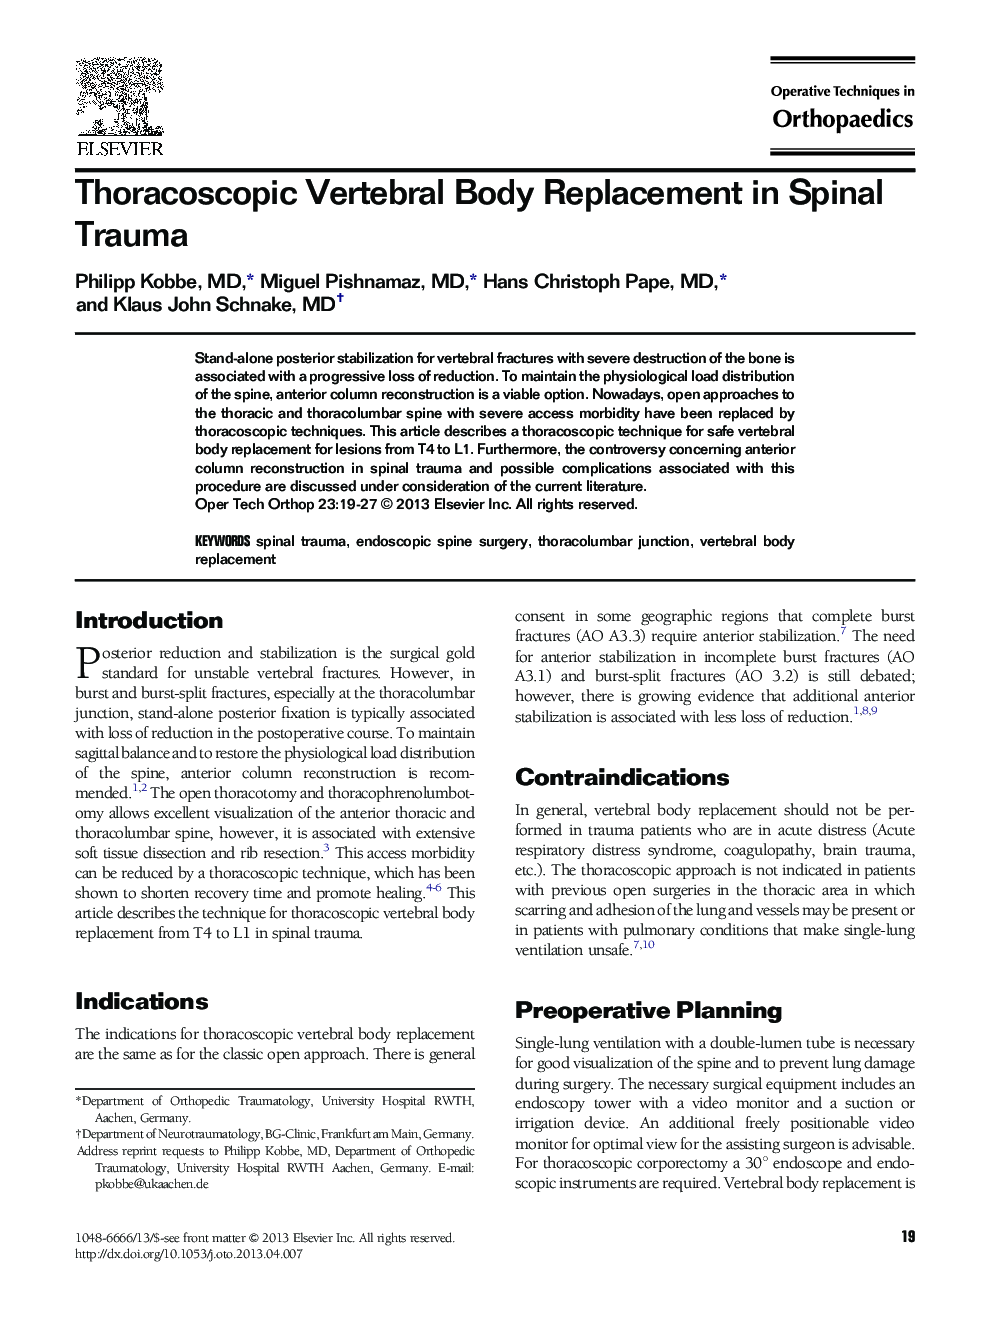 Thoracoscopic Vertebral Body Replacement in Spinal Trauma